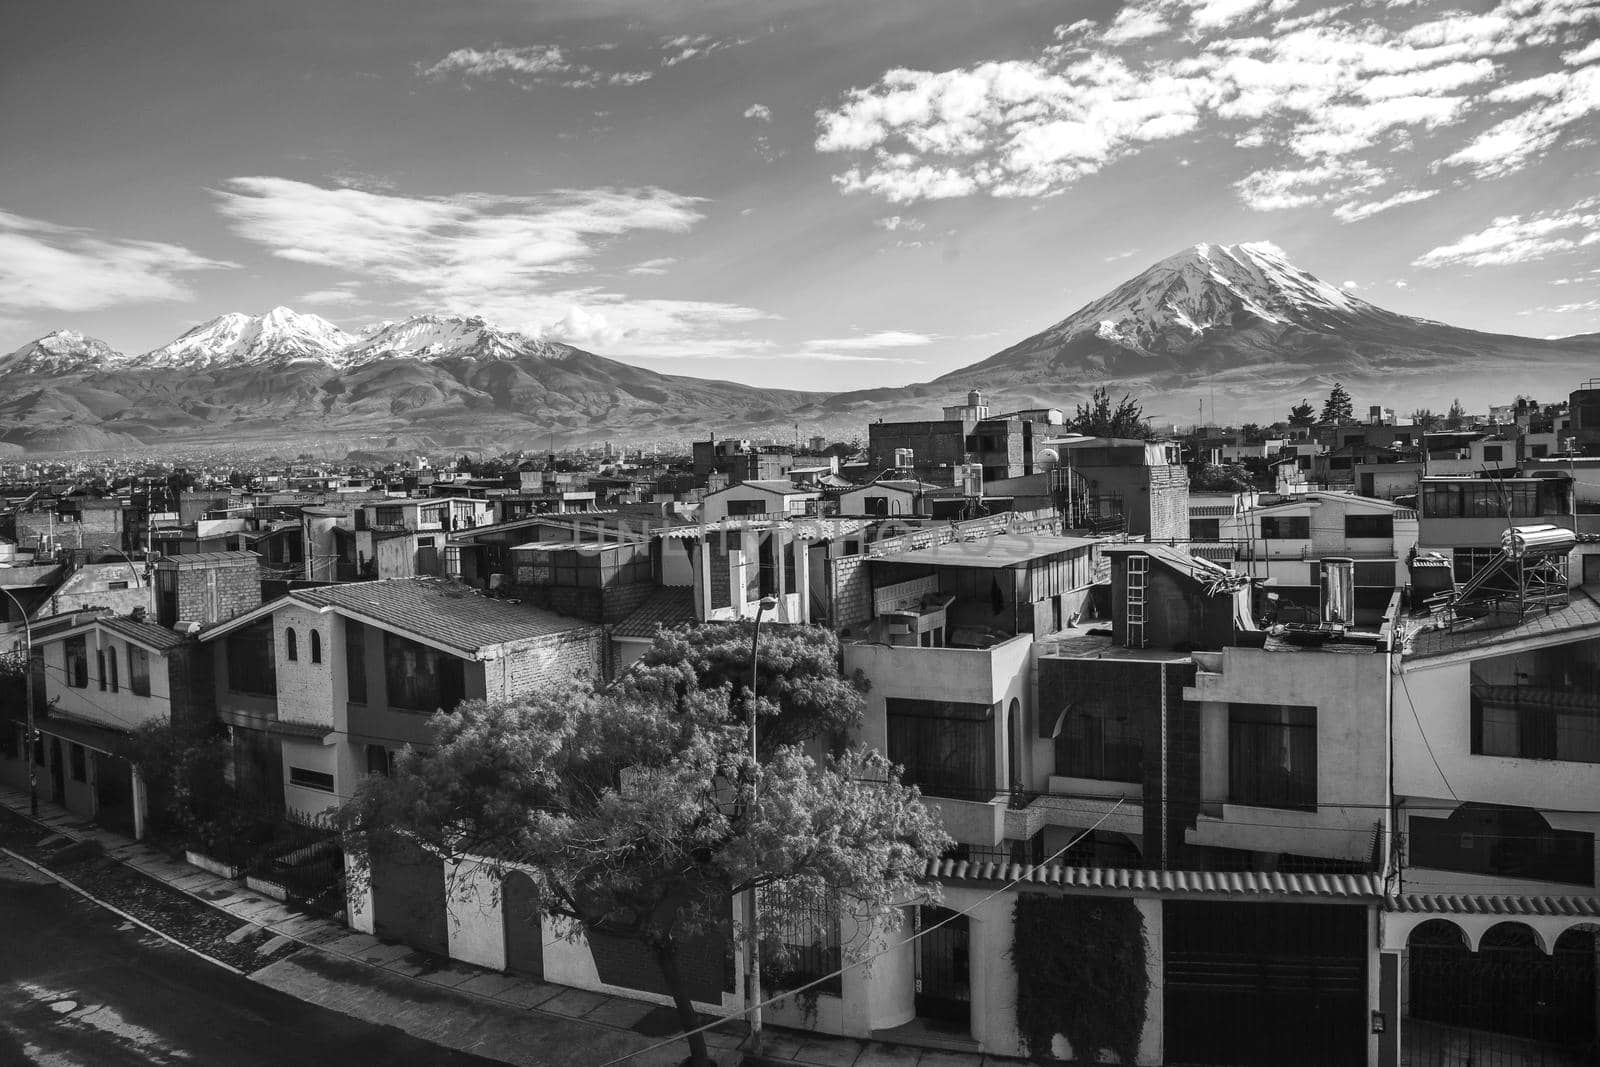 City of Arequipa with its iconic active volcanos of Misti and Chachani, Peru by wondry